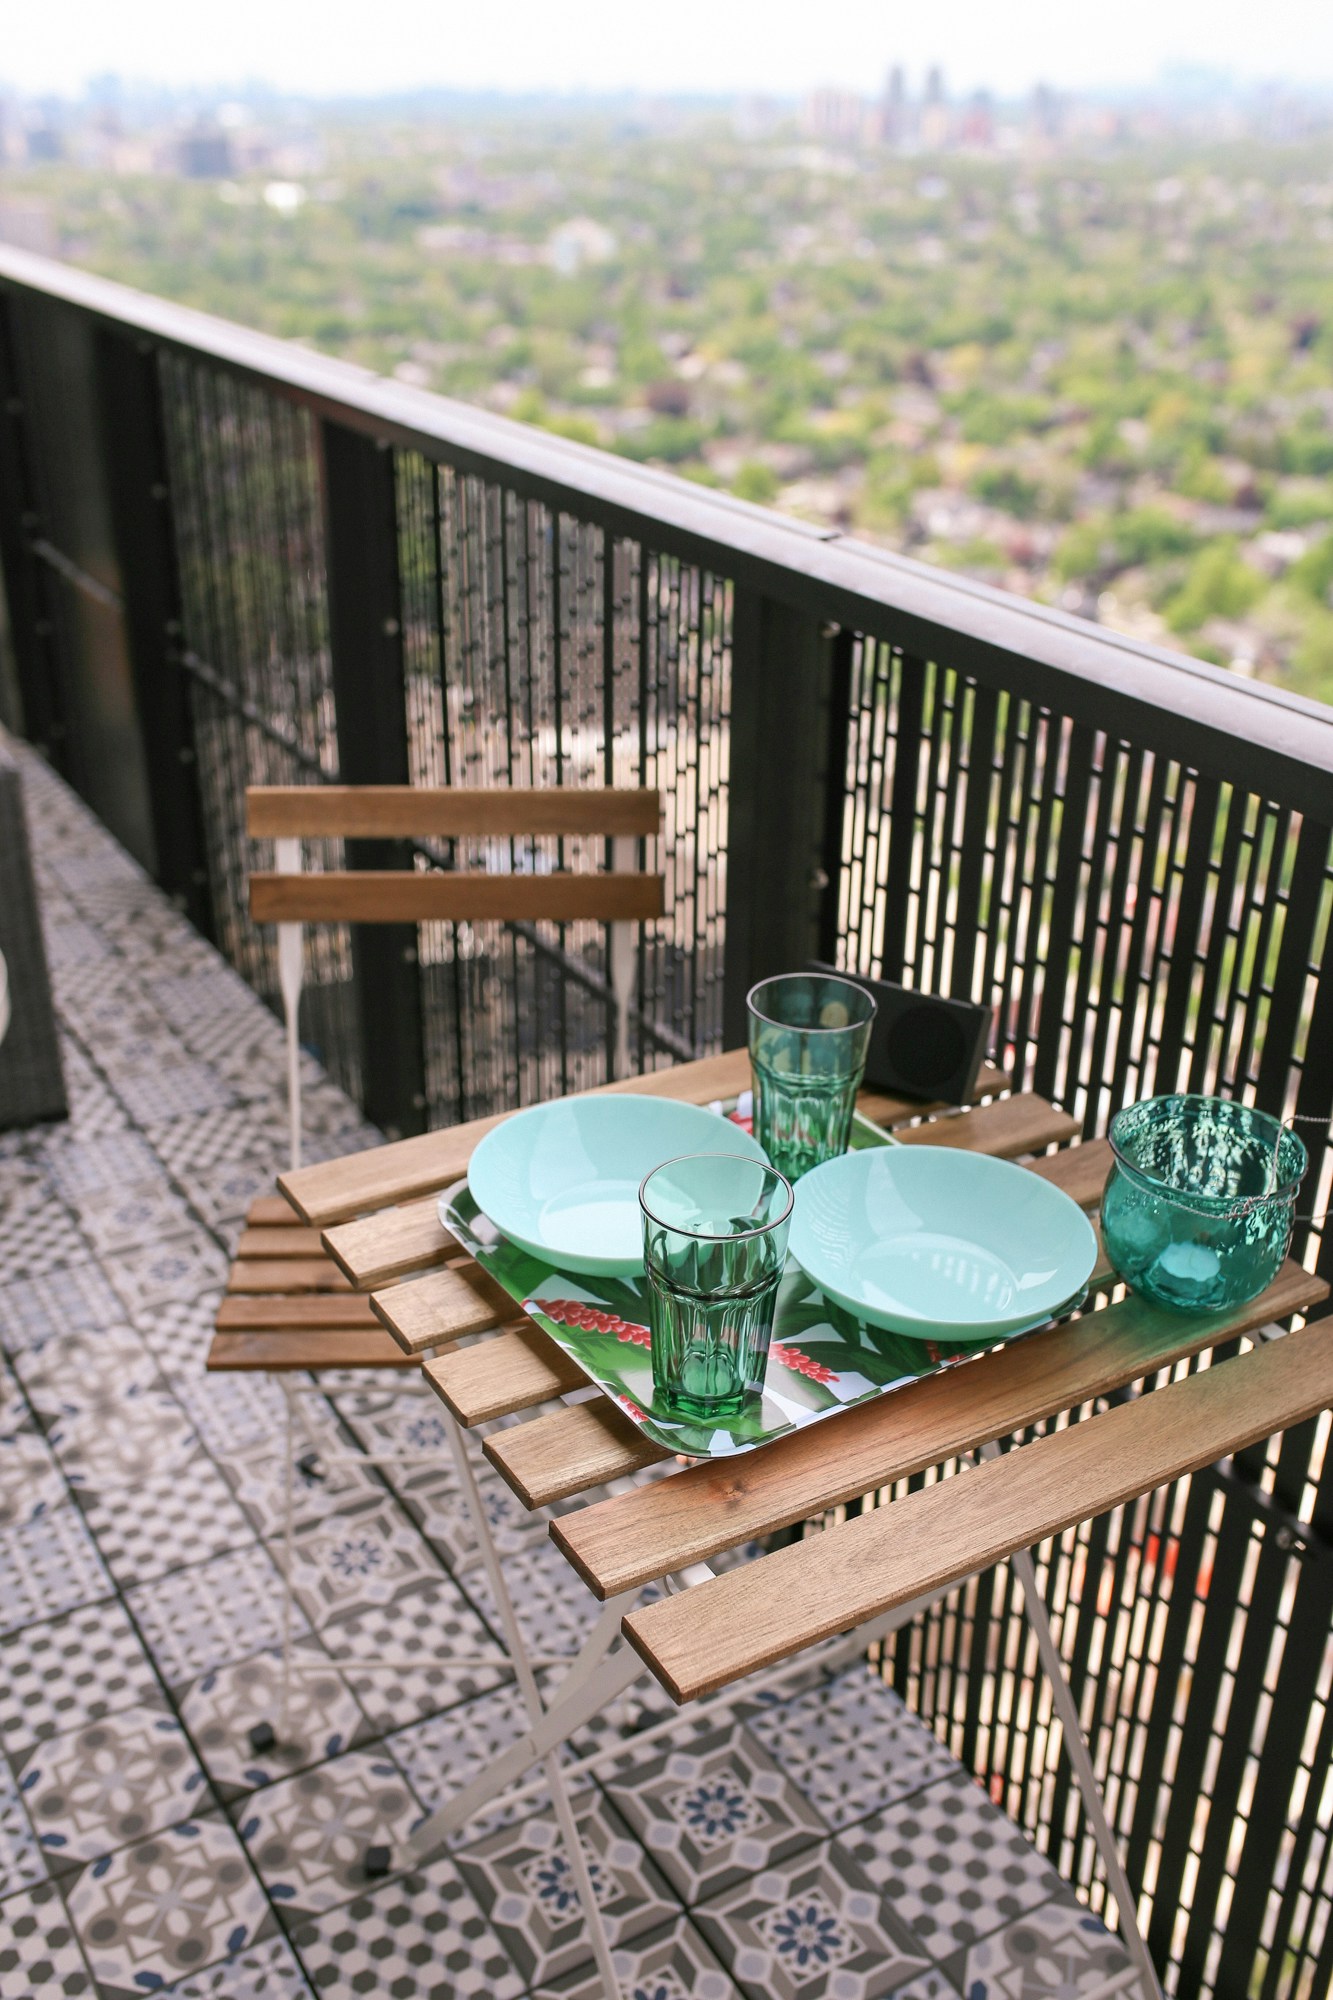 The IKEA Tärnö Bistro Set is a classic cheap and chic option for small spaces. I love that it folds up and makes for the perfect dining area on my balcony.